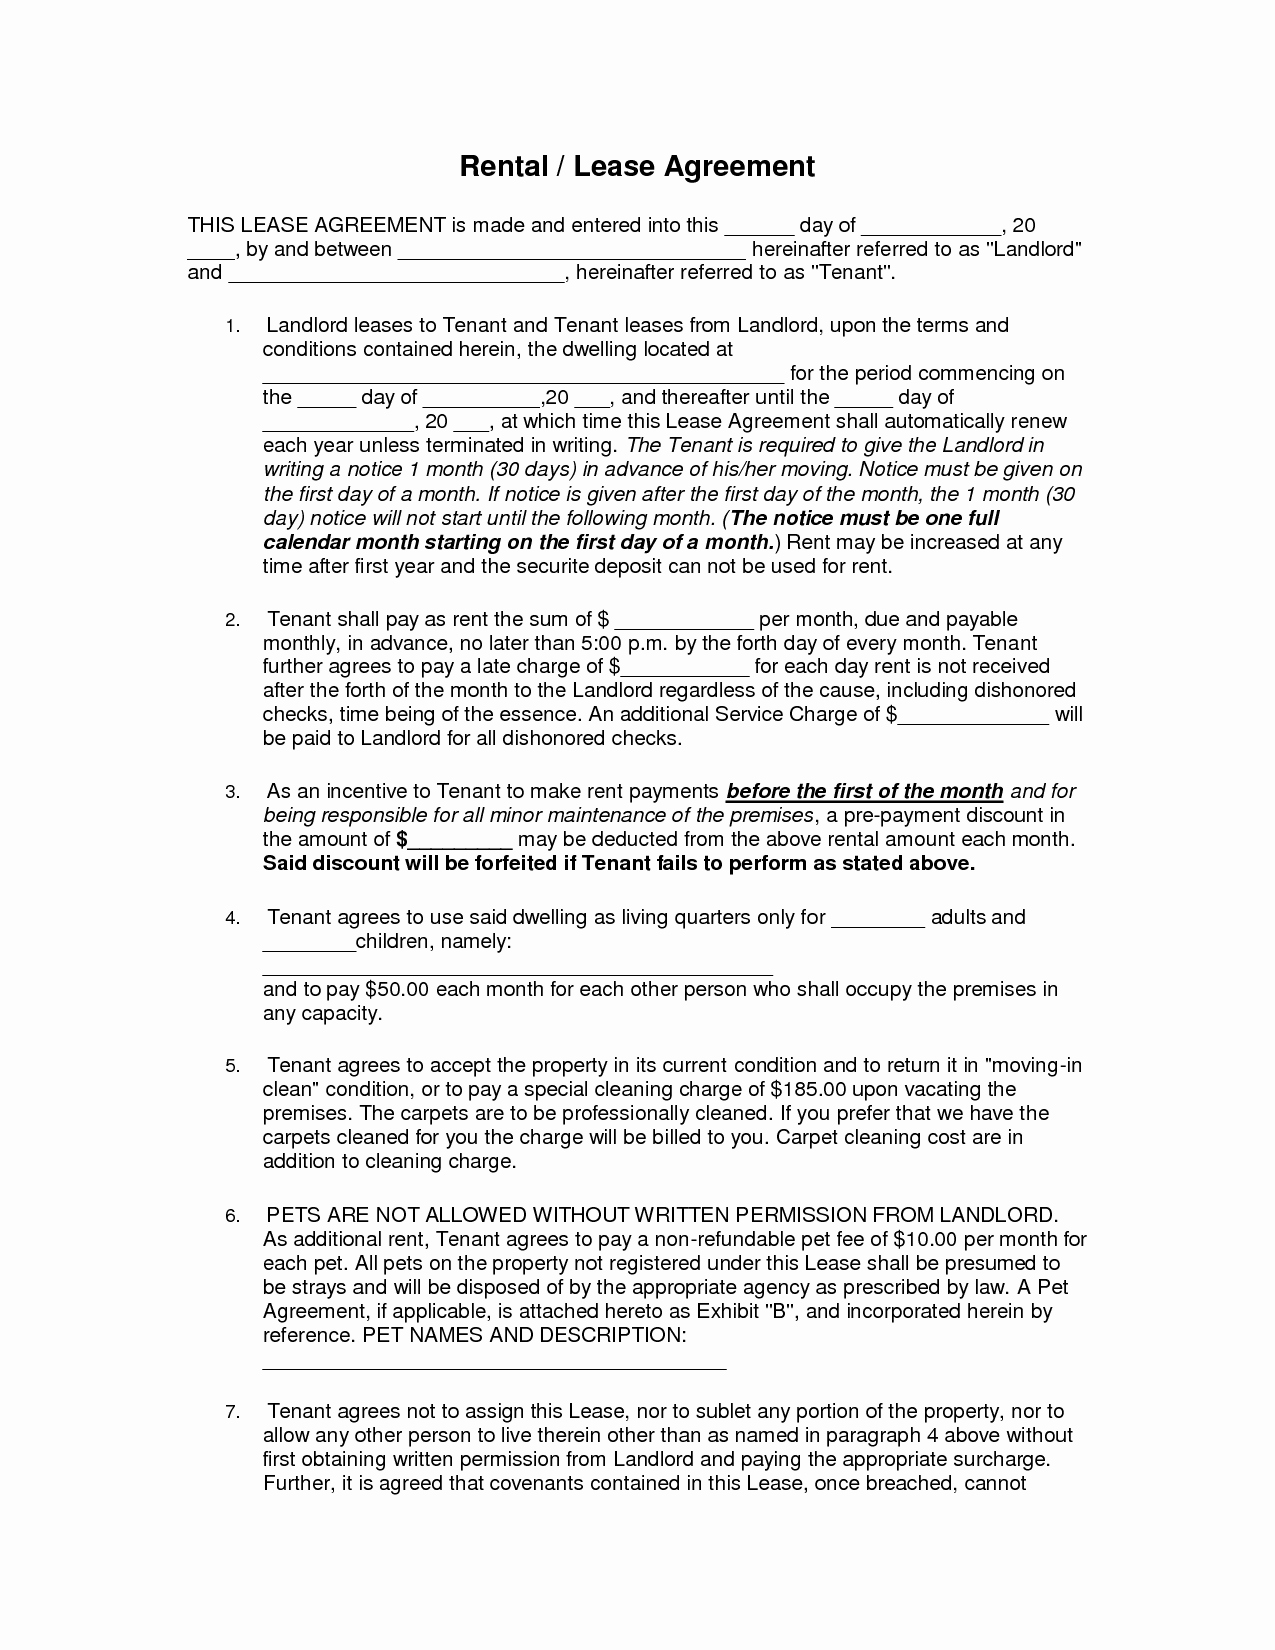 House Rental Agreement Template Best Of Free Copy Rental Lease Agreement 1275px